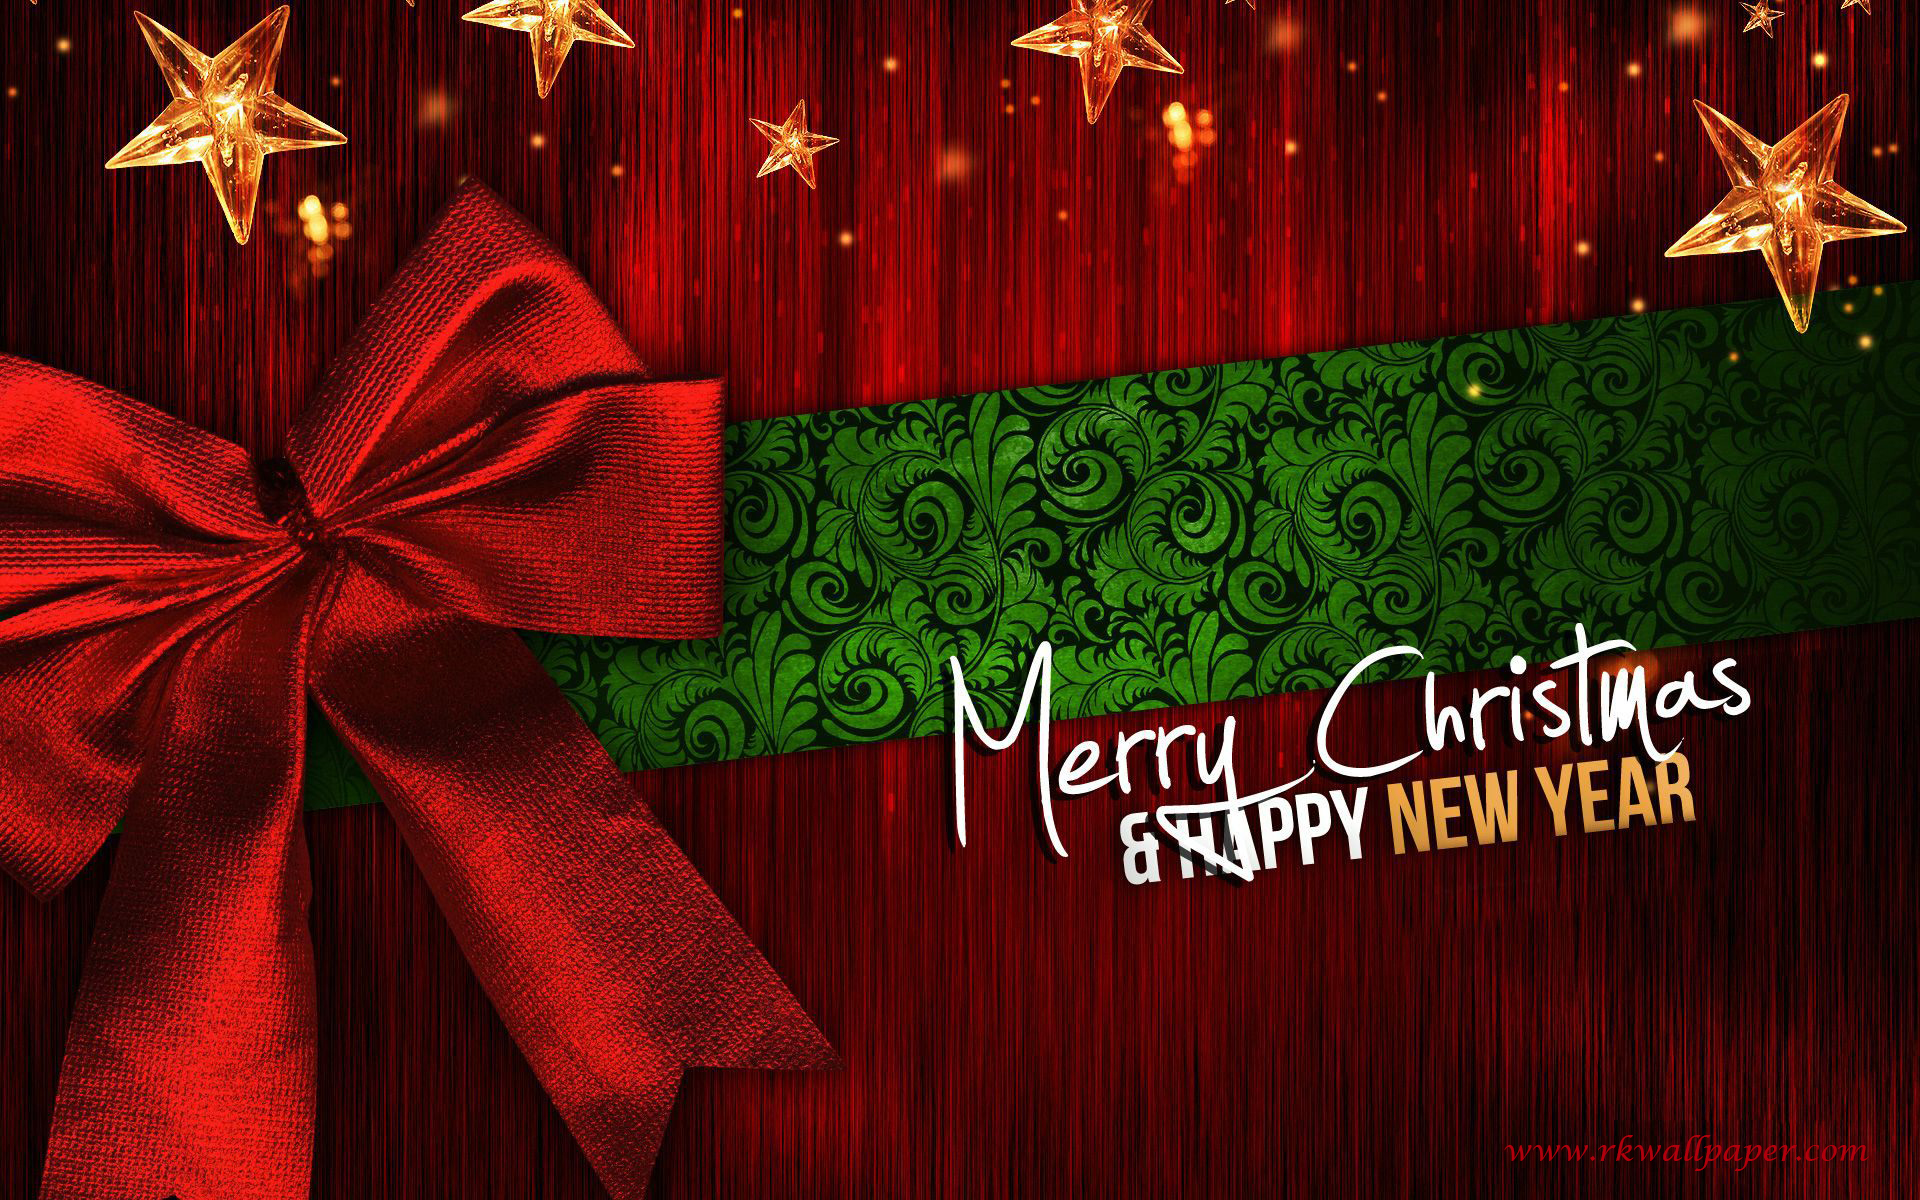 Merry Christmas And Happy New Year Wishes Wallpaper HD